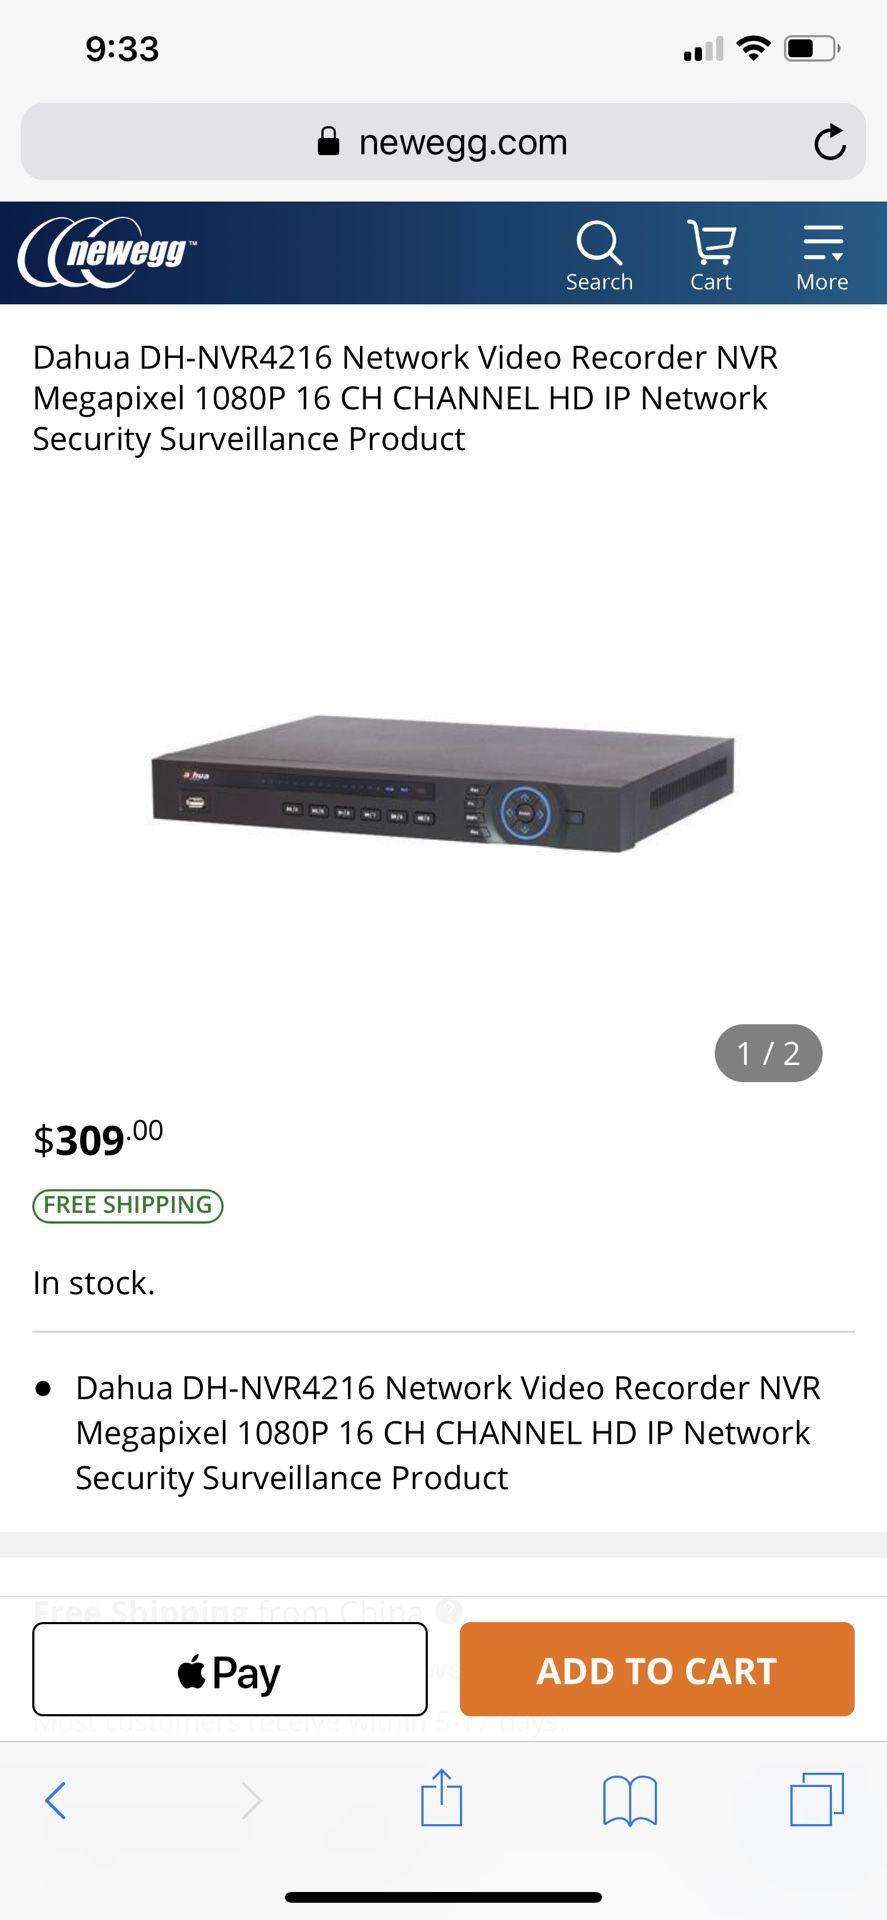 Dahua DH-NVR4216 Network Video Recorder NVR Megapixel 1080P 16 CH CHANNEL HD IP Network Security Surveillance Product